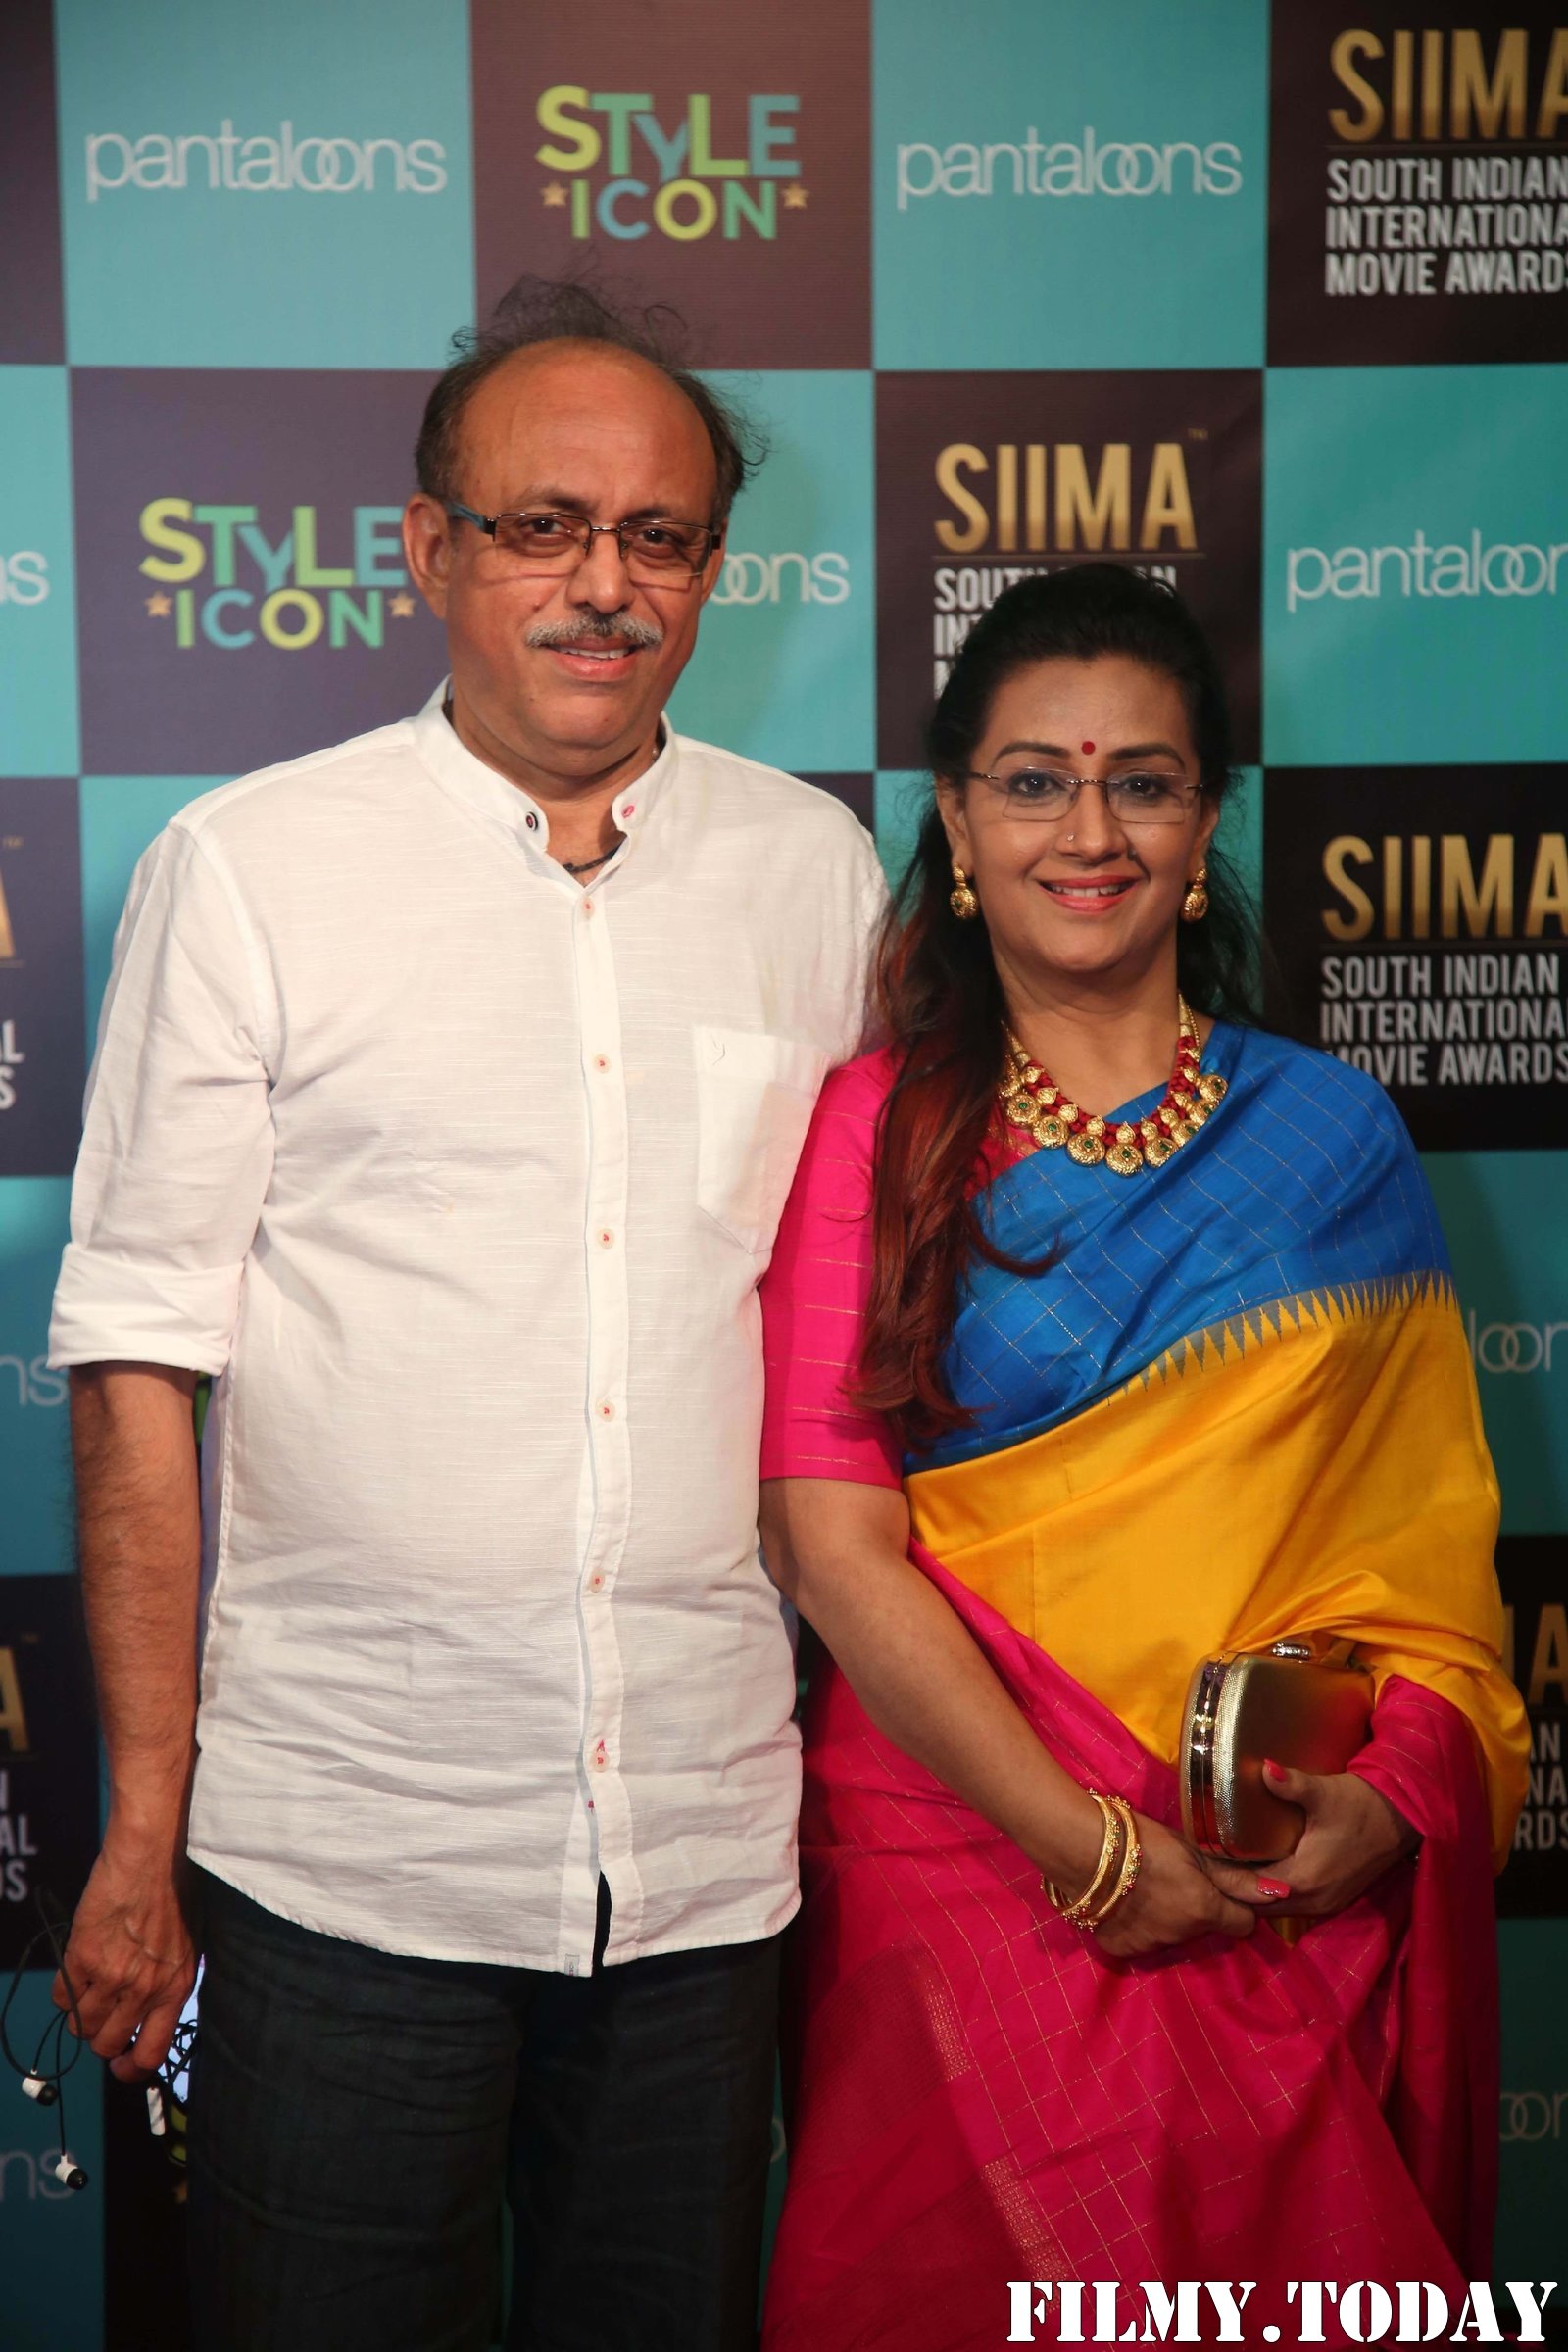 SIIMA Awards 2019 -Day 2 Photos | Picture 1676009